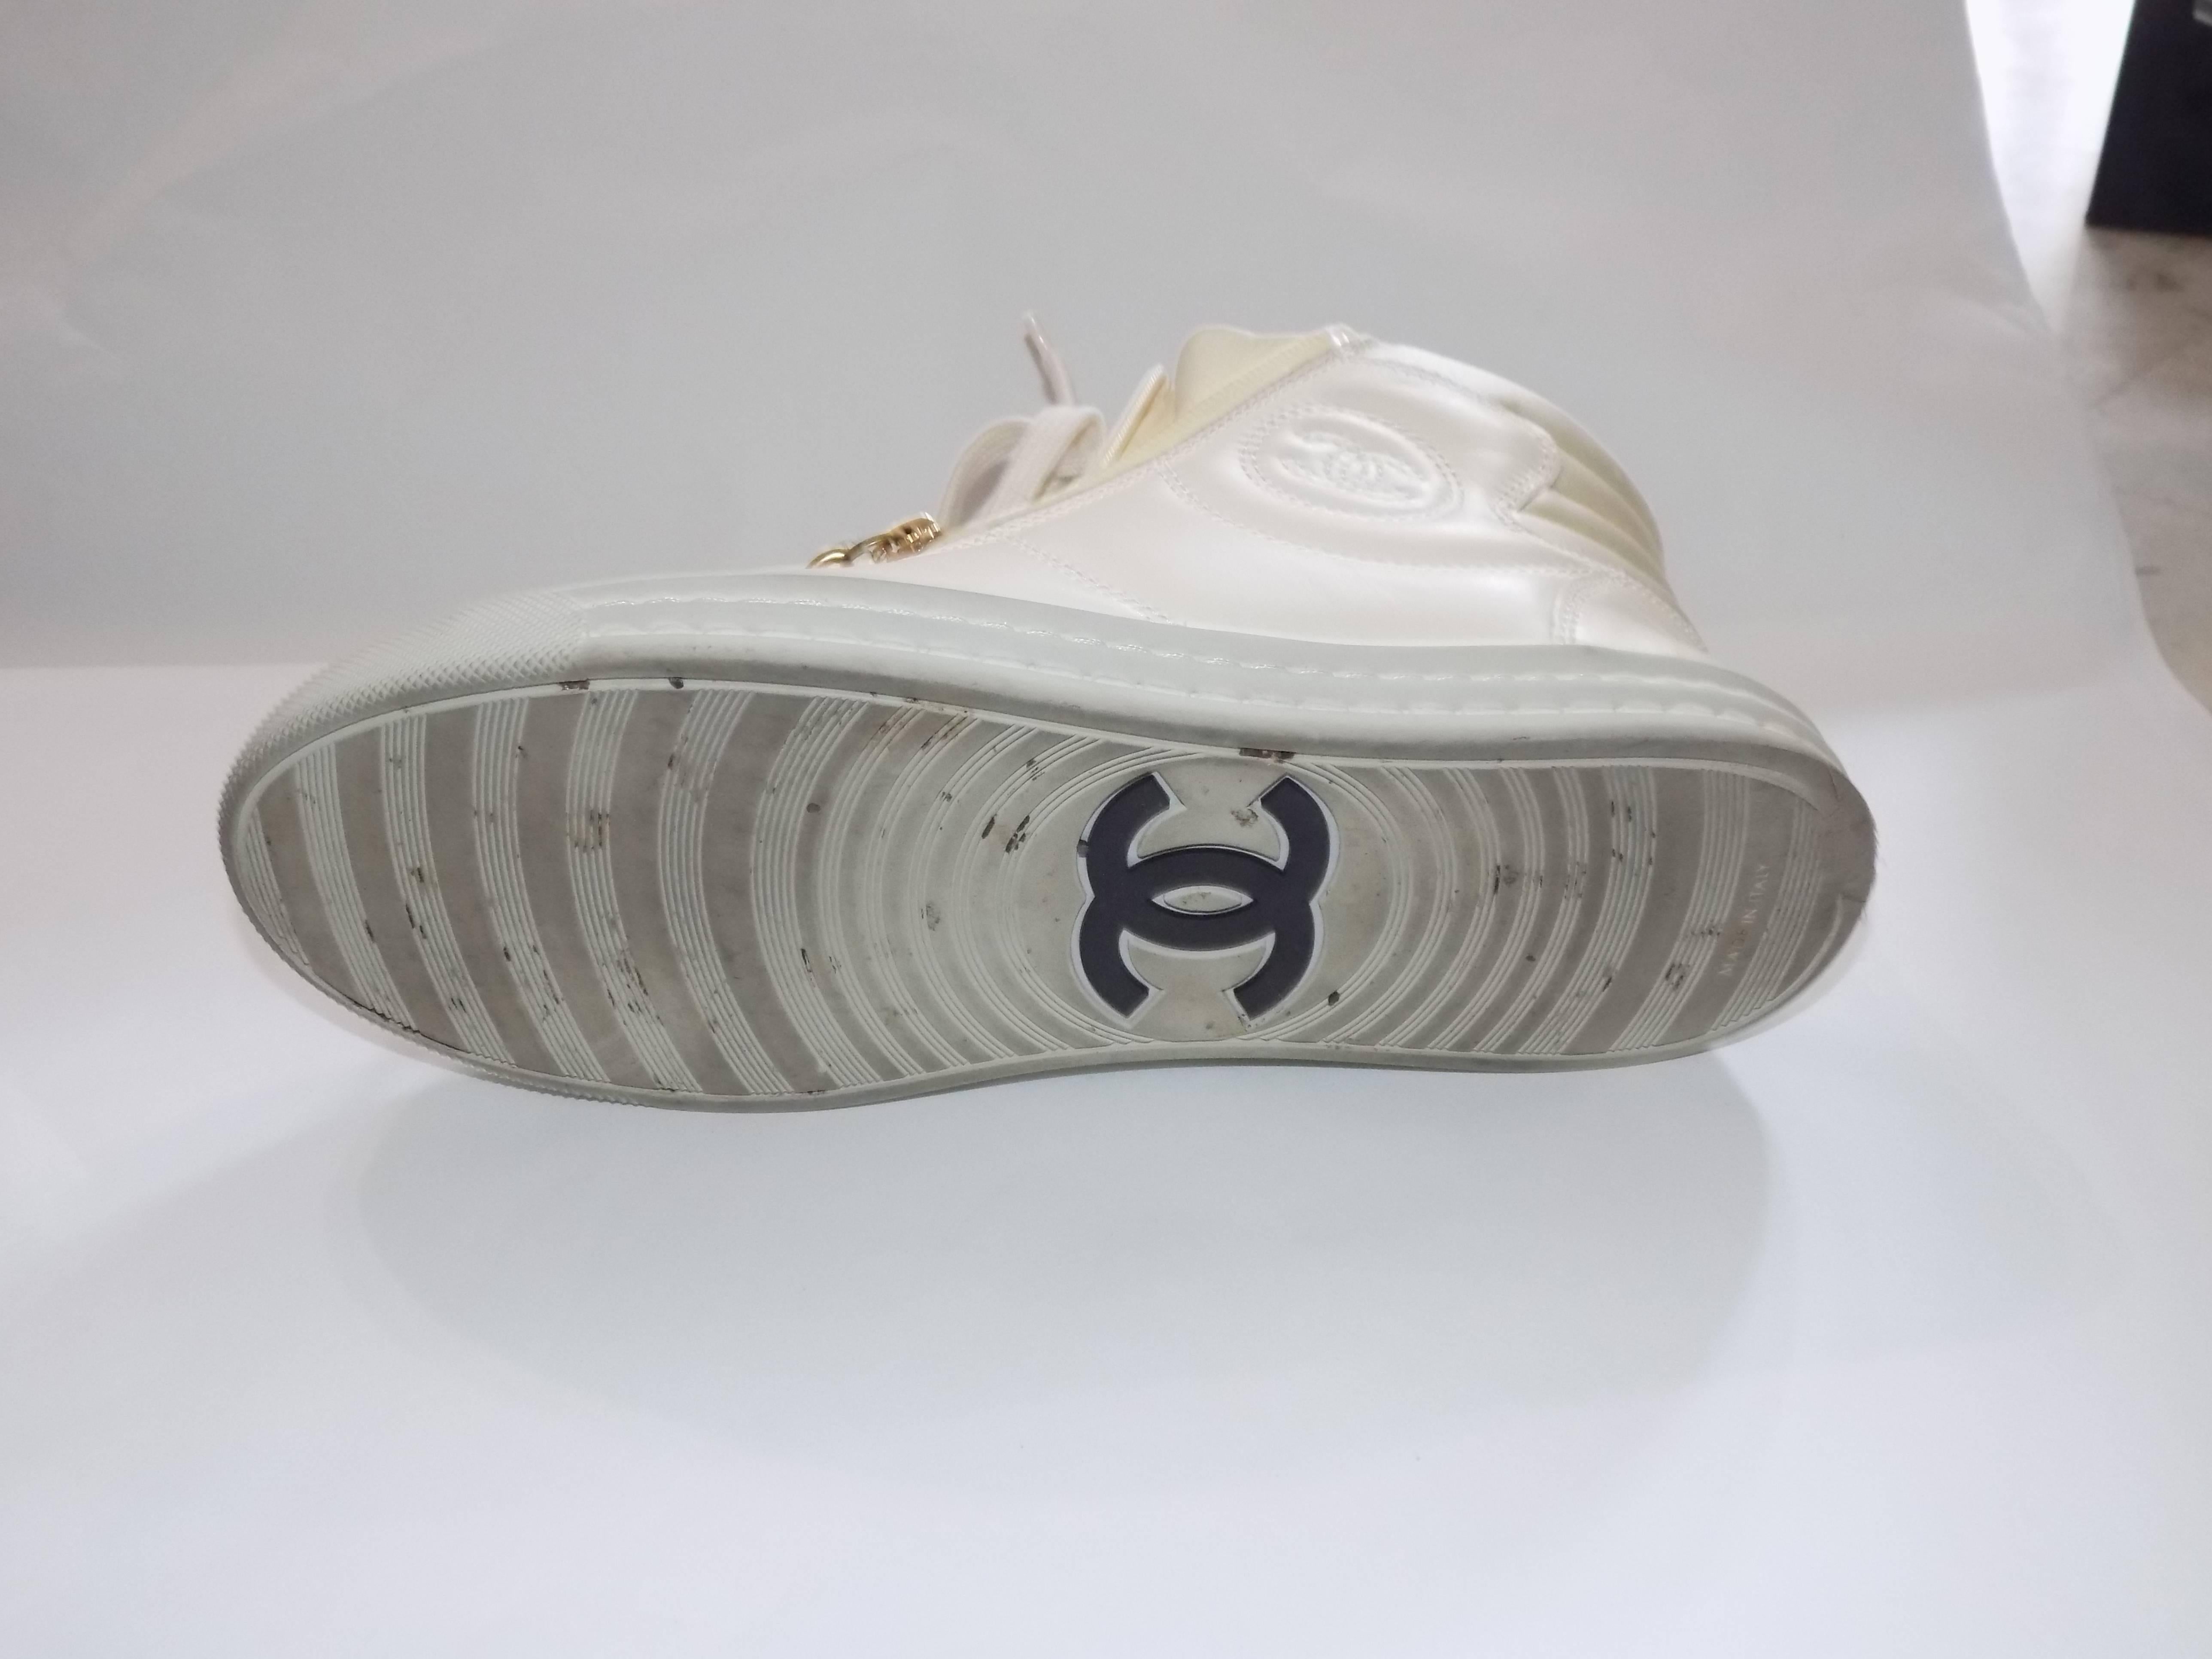  Chanel 37.5   High Top Sneakers shoes  with  Chain winter white 2